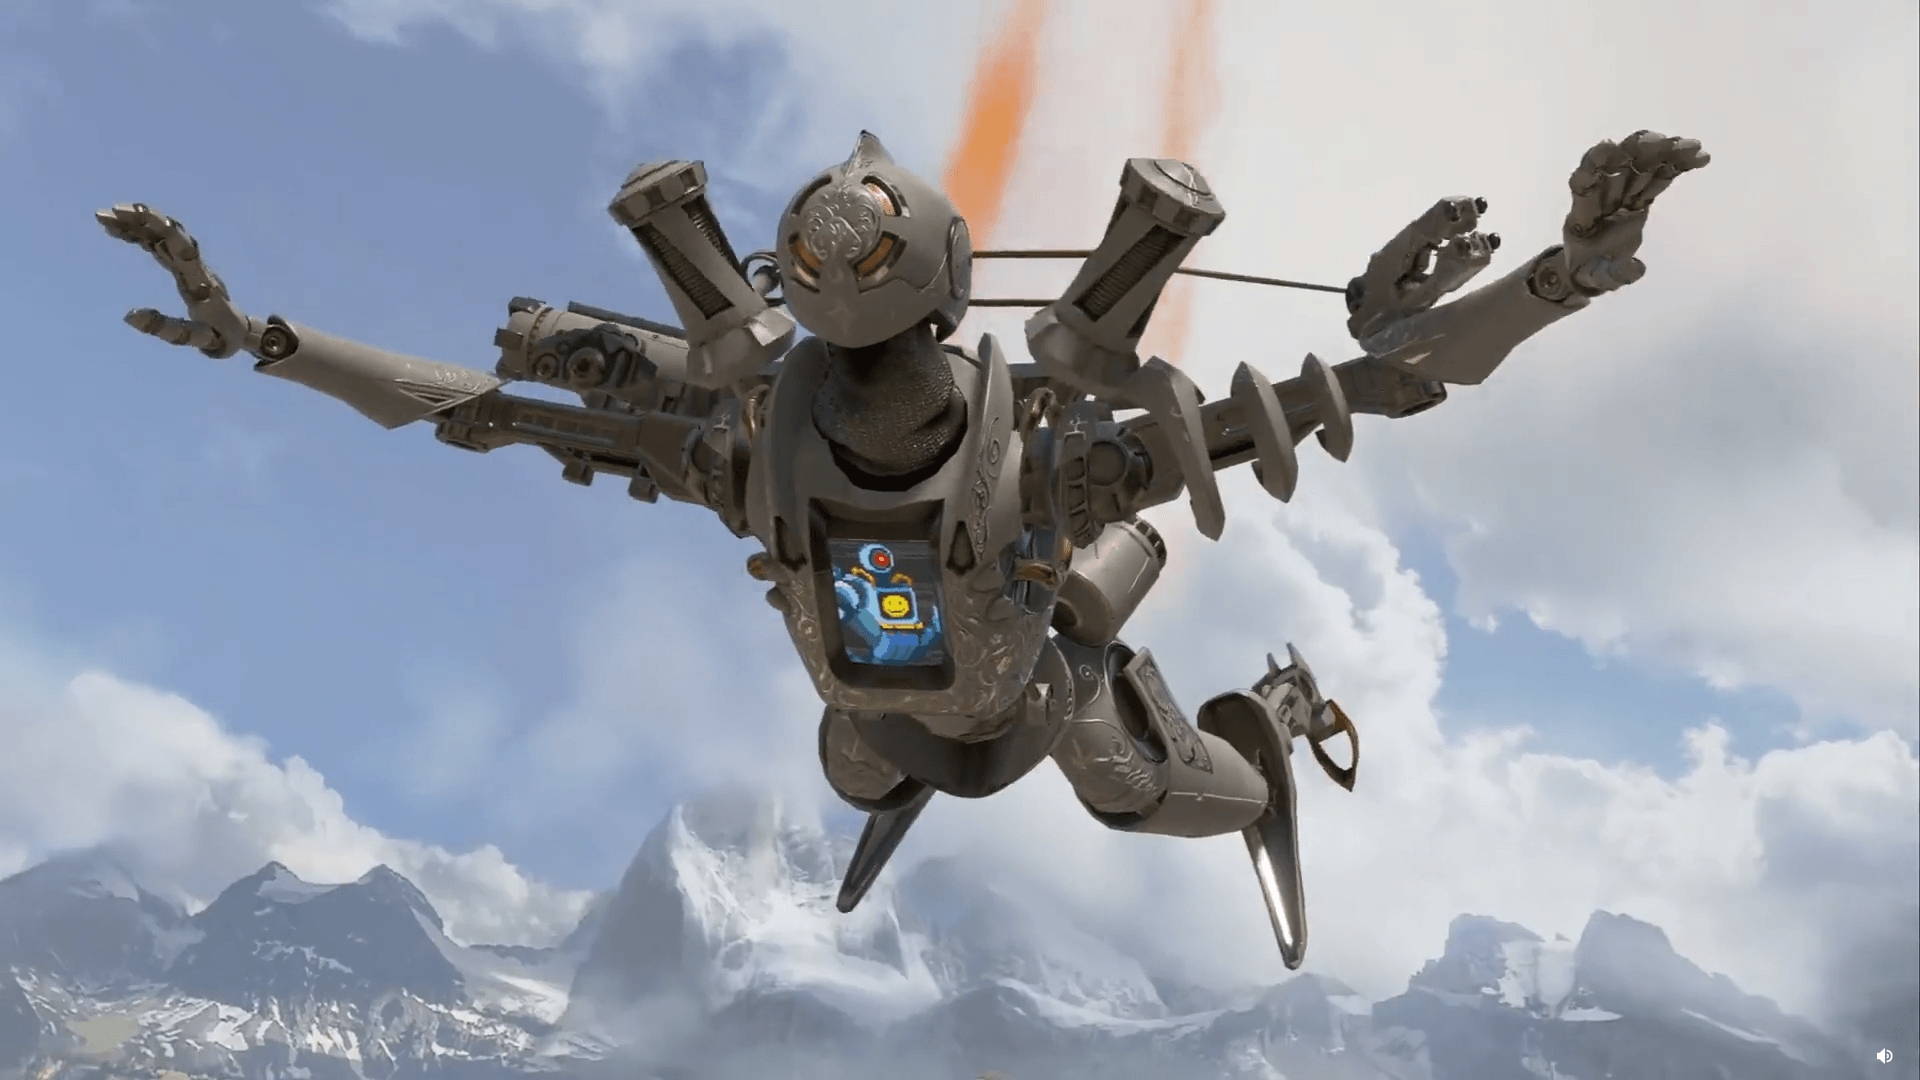 Apex Legends' Update 1.16 Brings Solos and Iron Crown Event